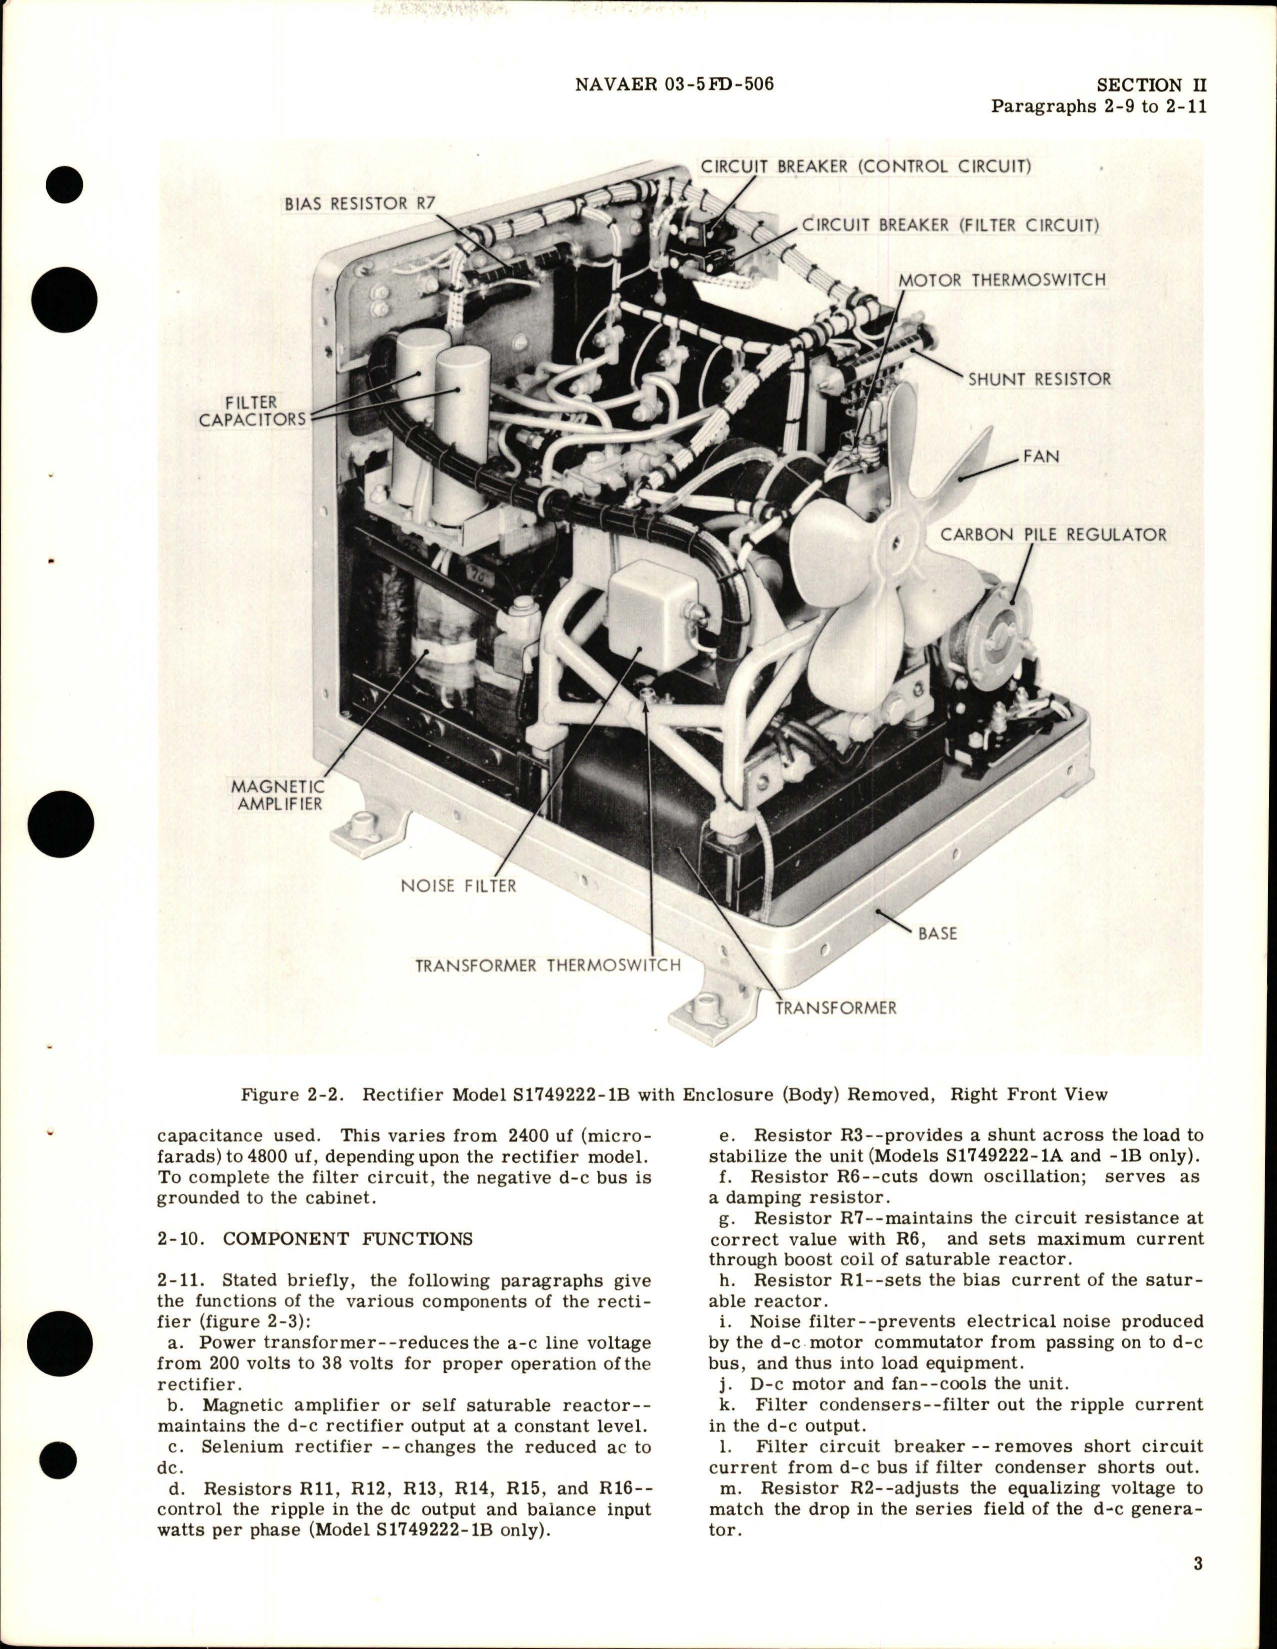 Sample page 9 from AirCorps Library document: Service and Overhaul Instructions for Airborne Rectifier - 